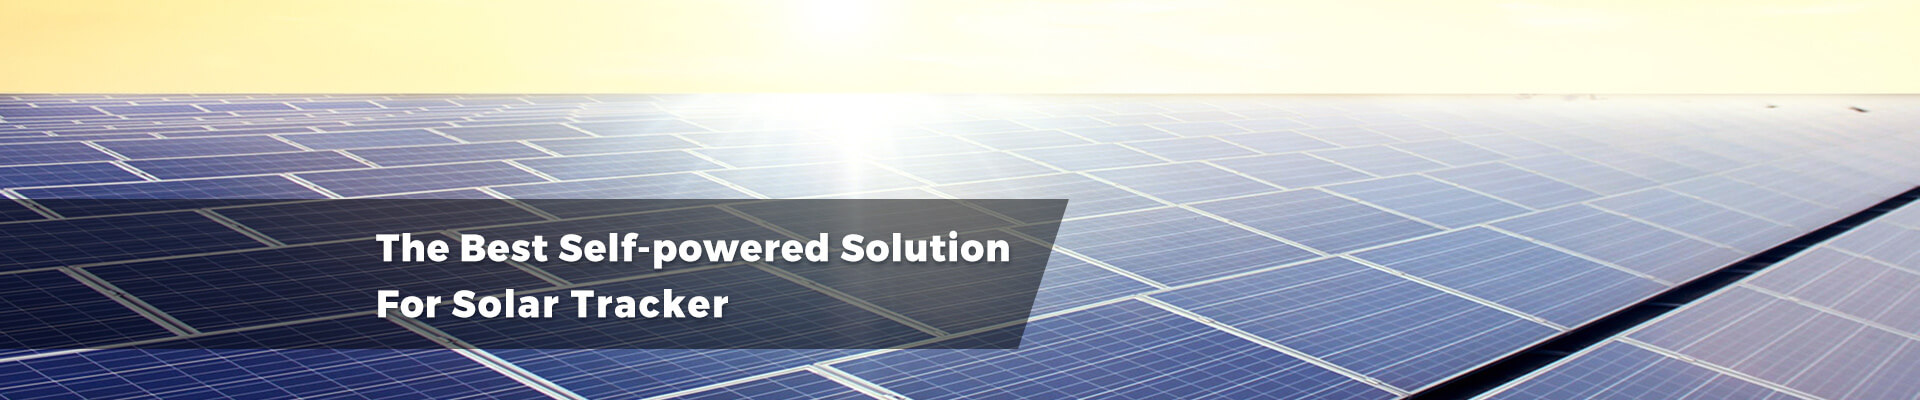 The Best Self-powered Solution For Solar Tracker/Tracking System